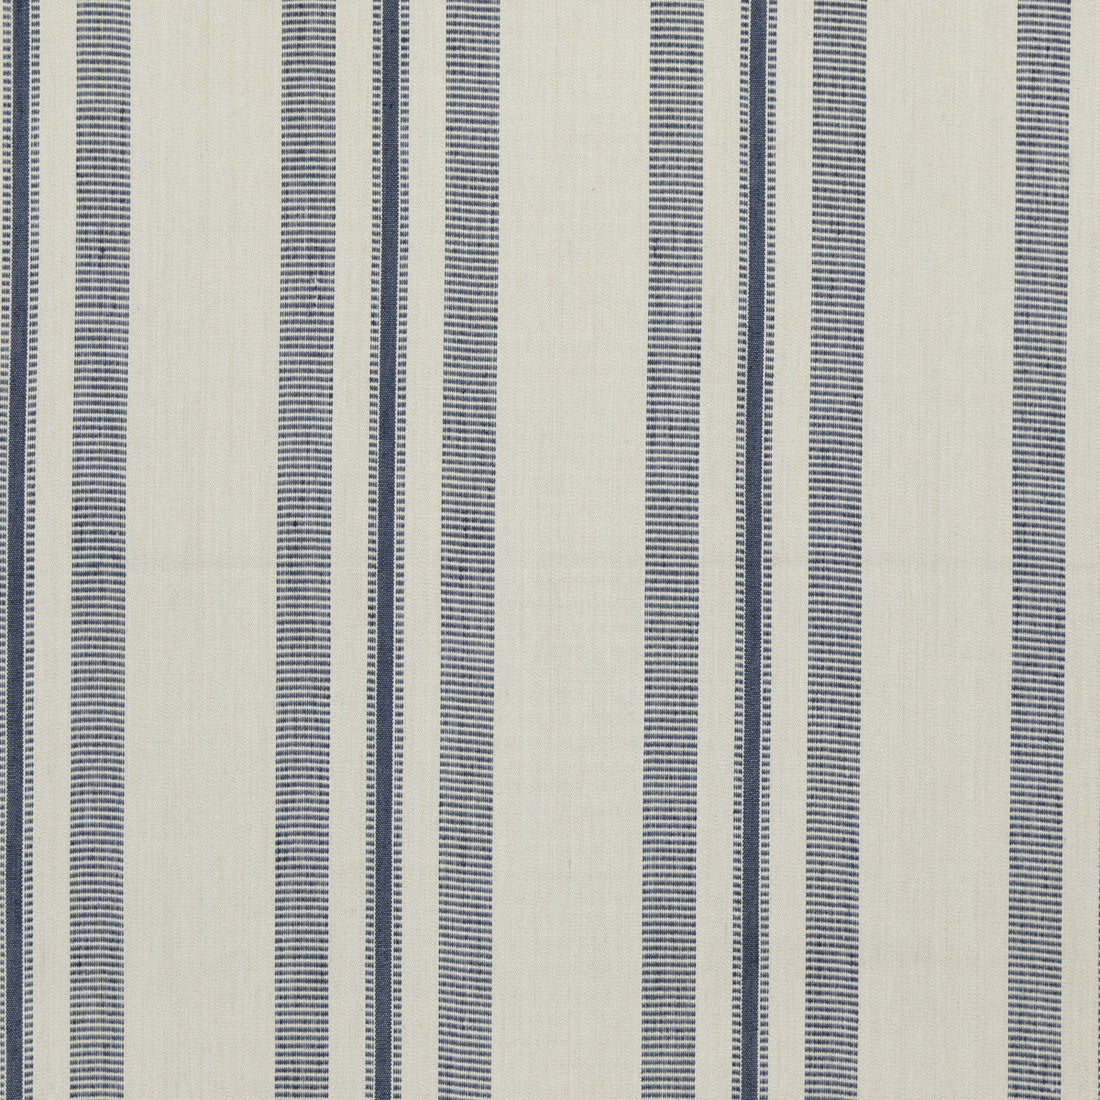 Stanton fabric in indigo color - pattern ED85303.680.0 - by Threads in the Great Stripes collection